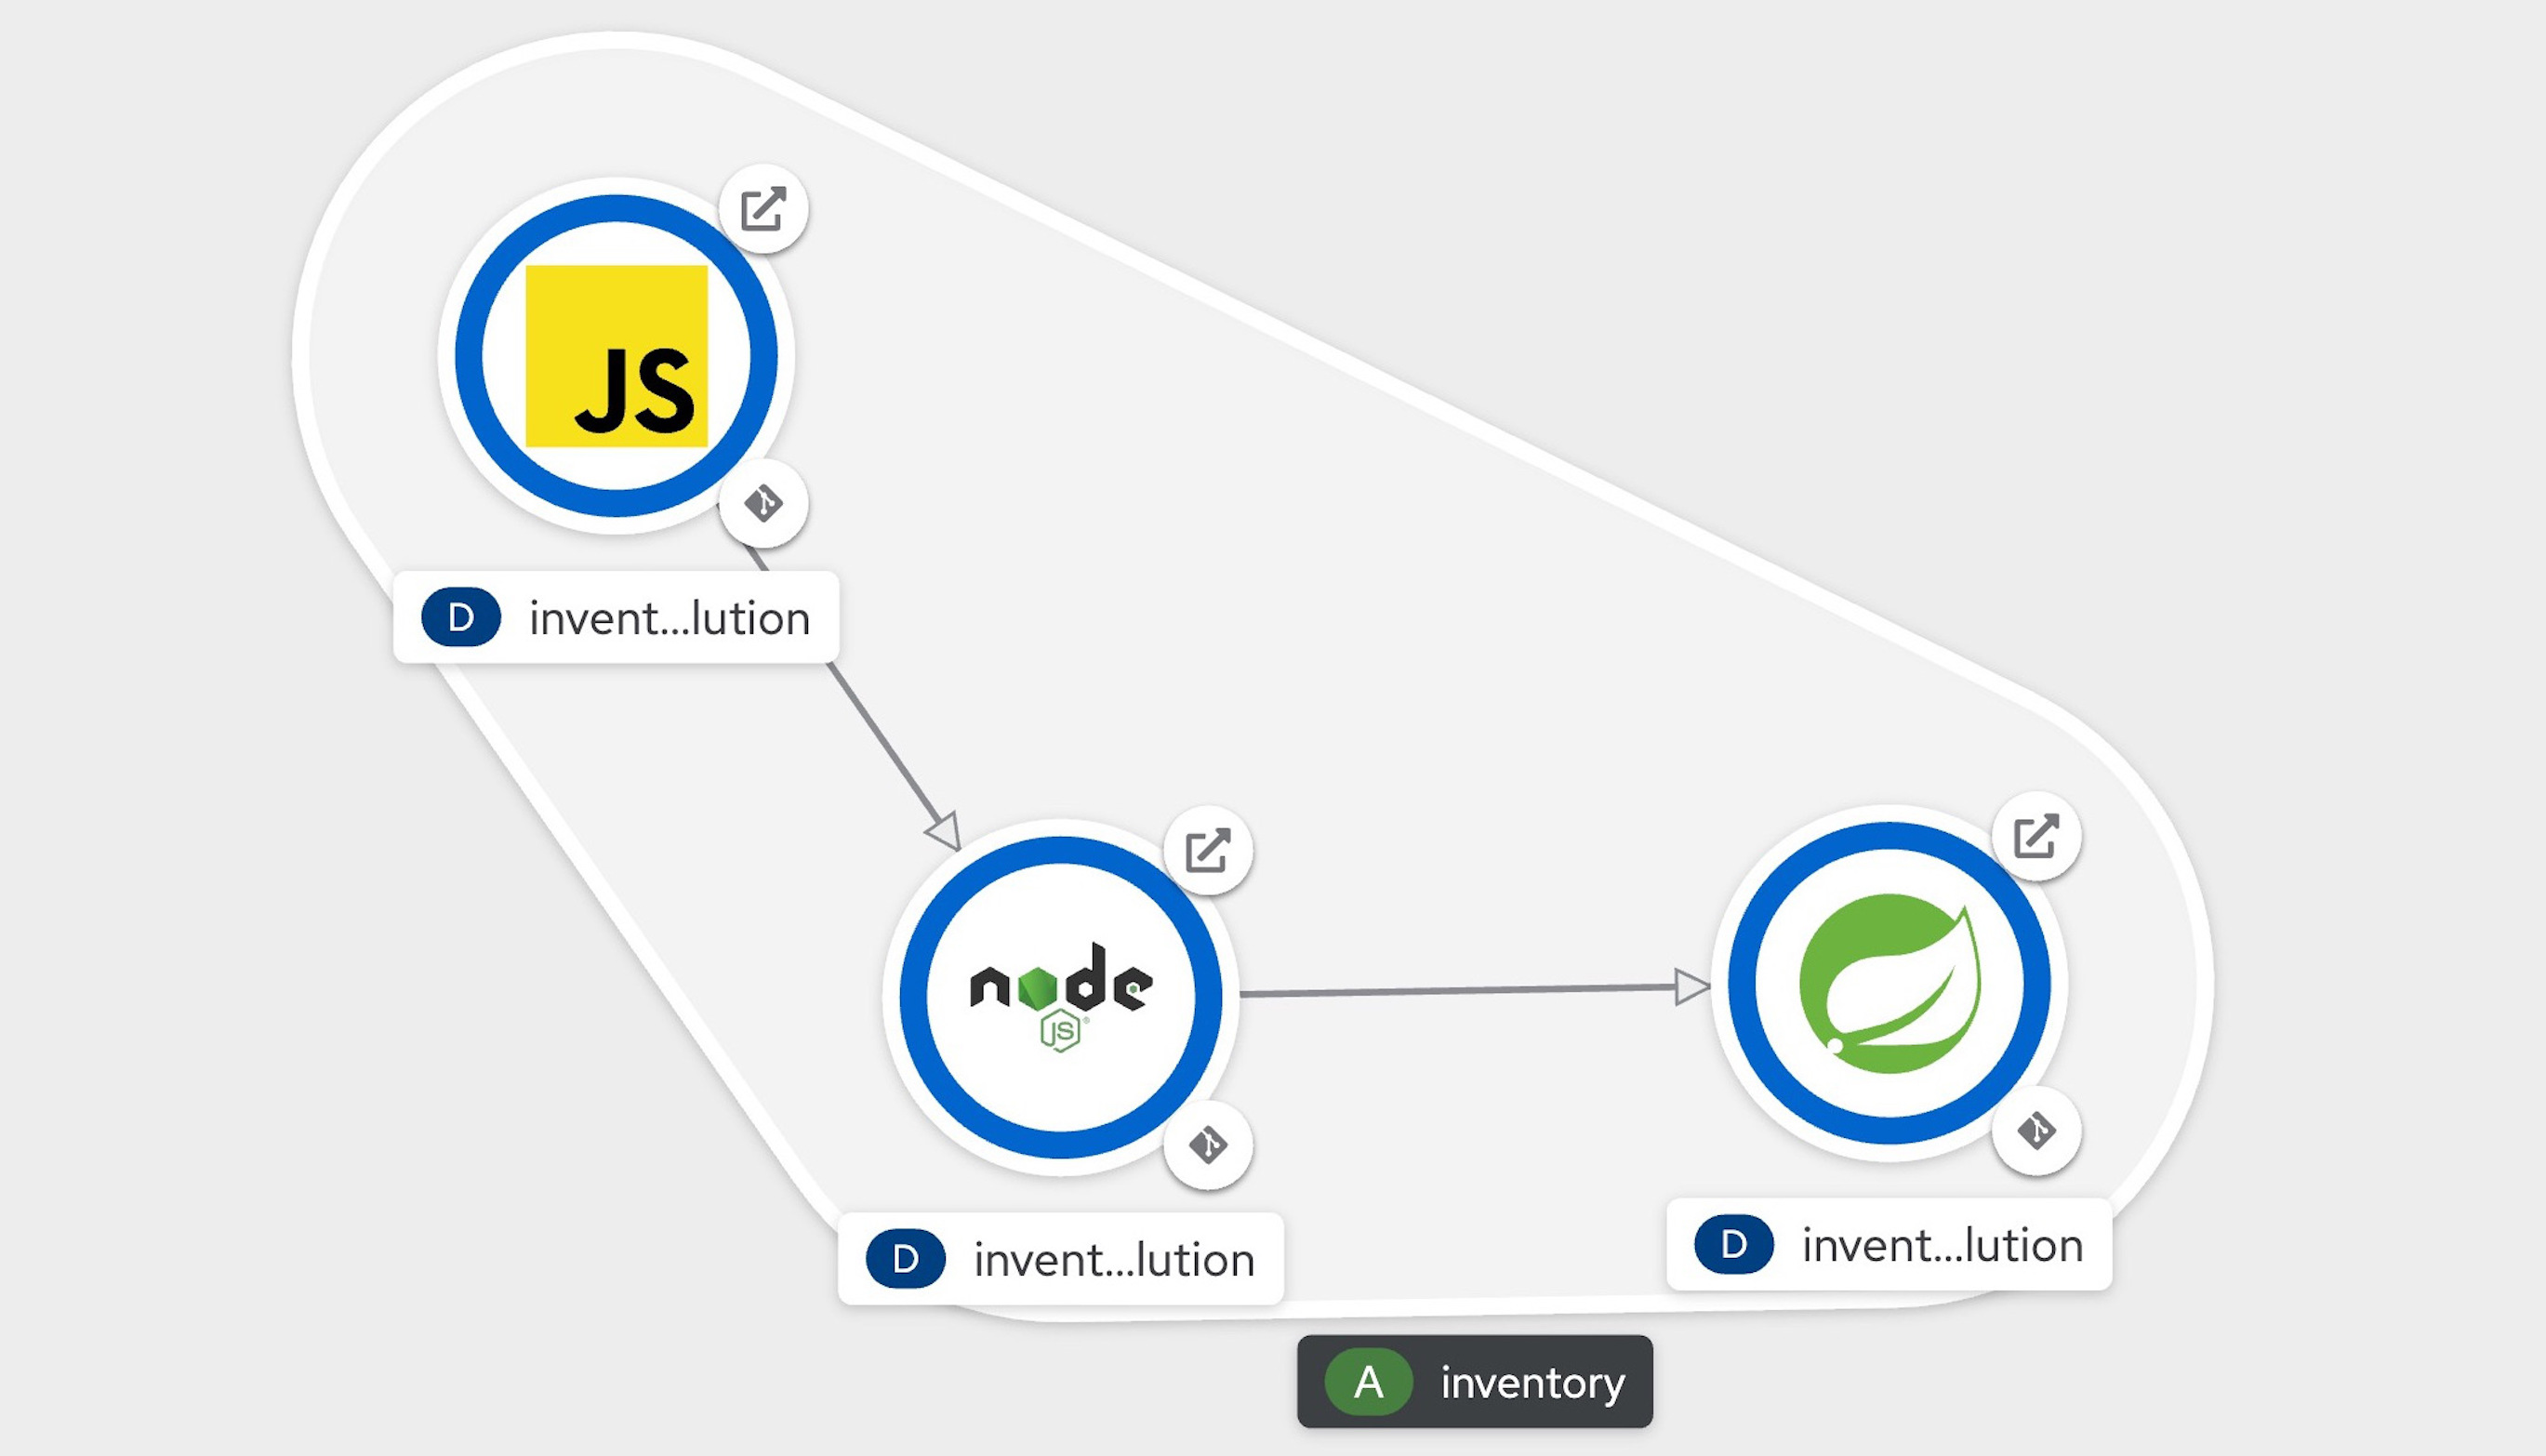 Deploy a 3 tier Microservice using React, Node.js, and Java